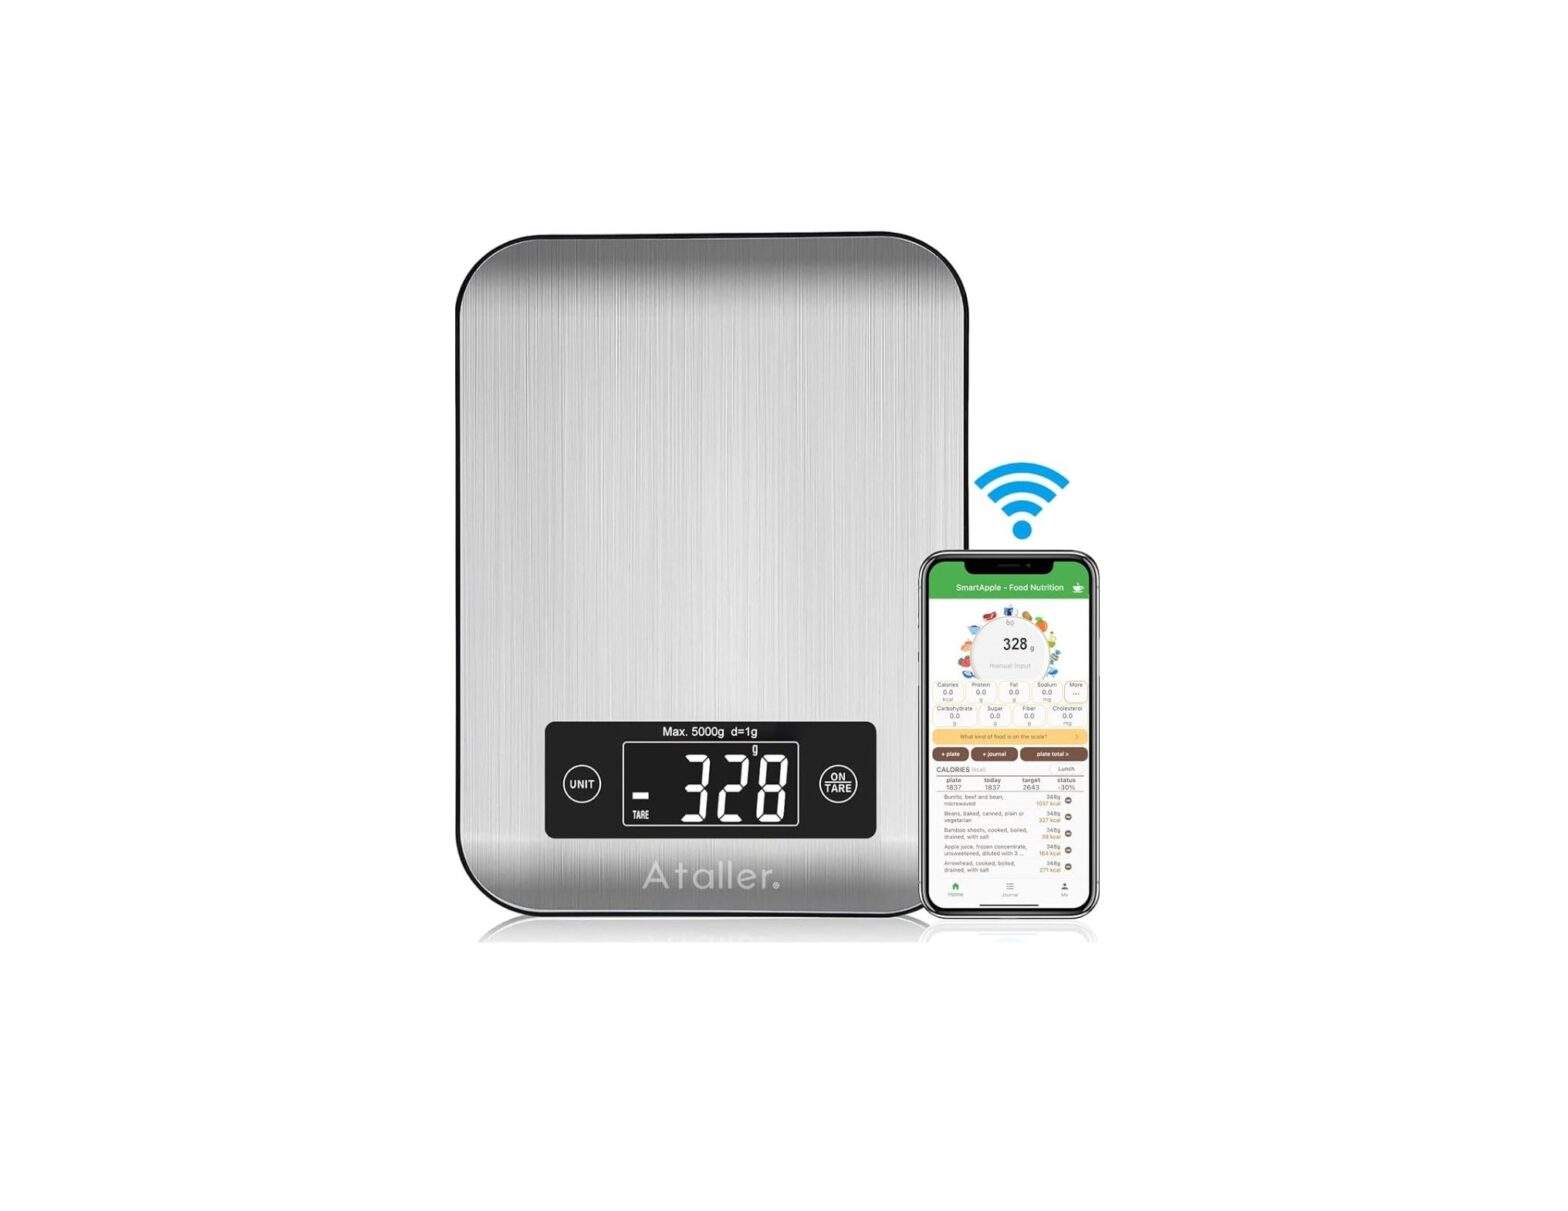 Ataller KS-2099 Smart Food Nutrition Scale User Manual - Featured image